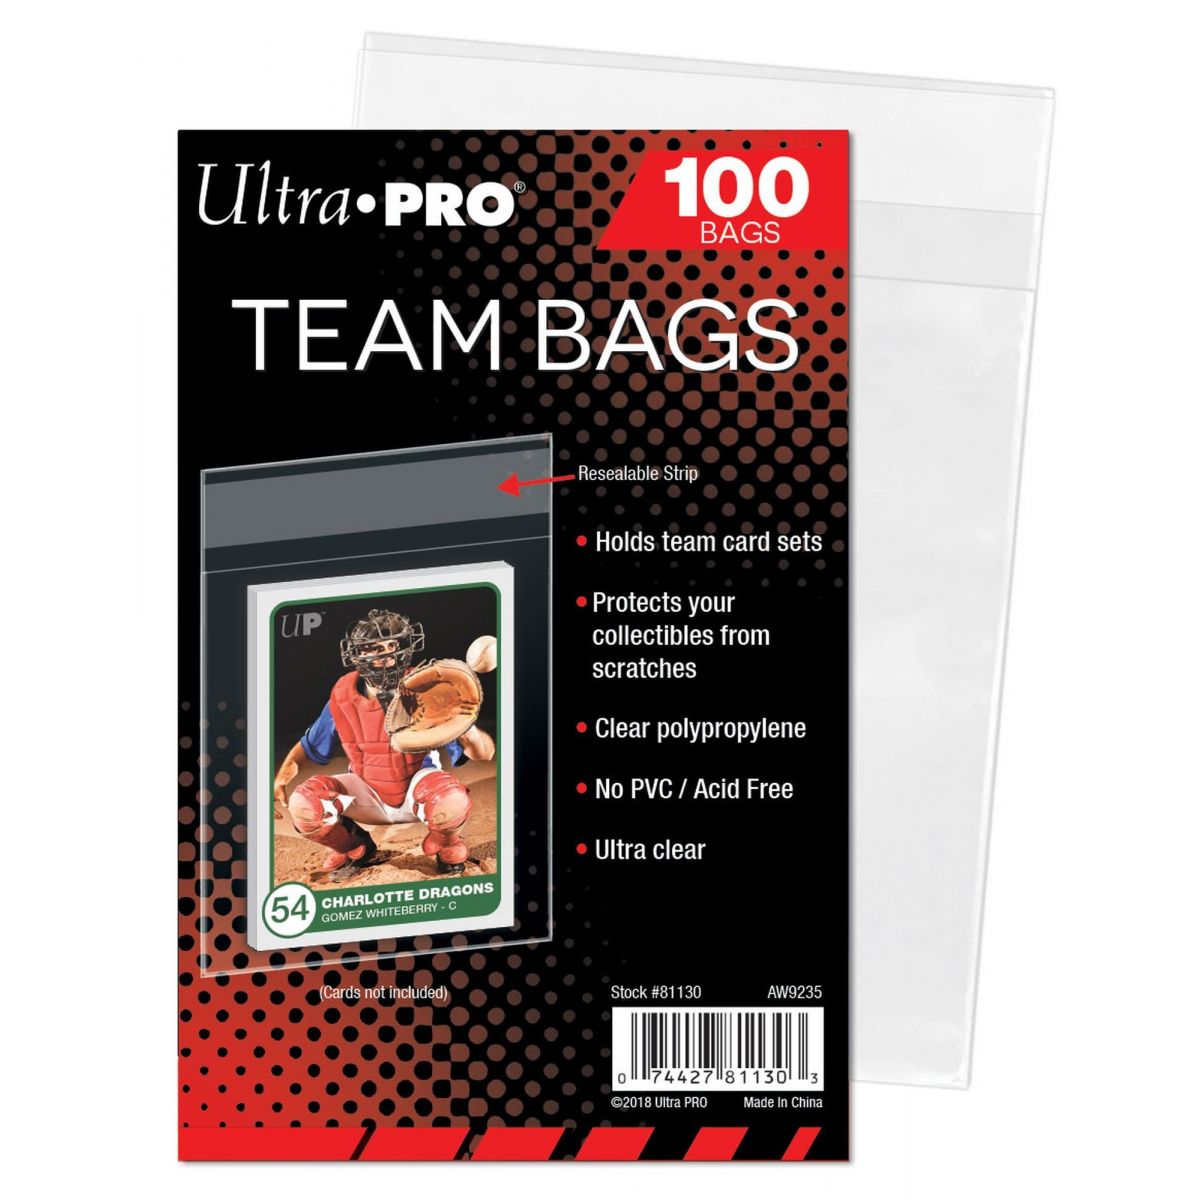 Item Ultra Pro - Team Bags - Resealable - Sleeves Refermables Top Loader (100)